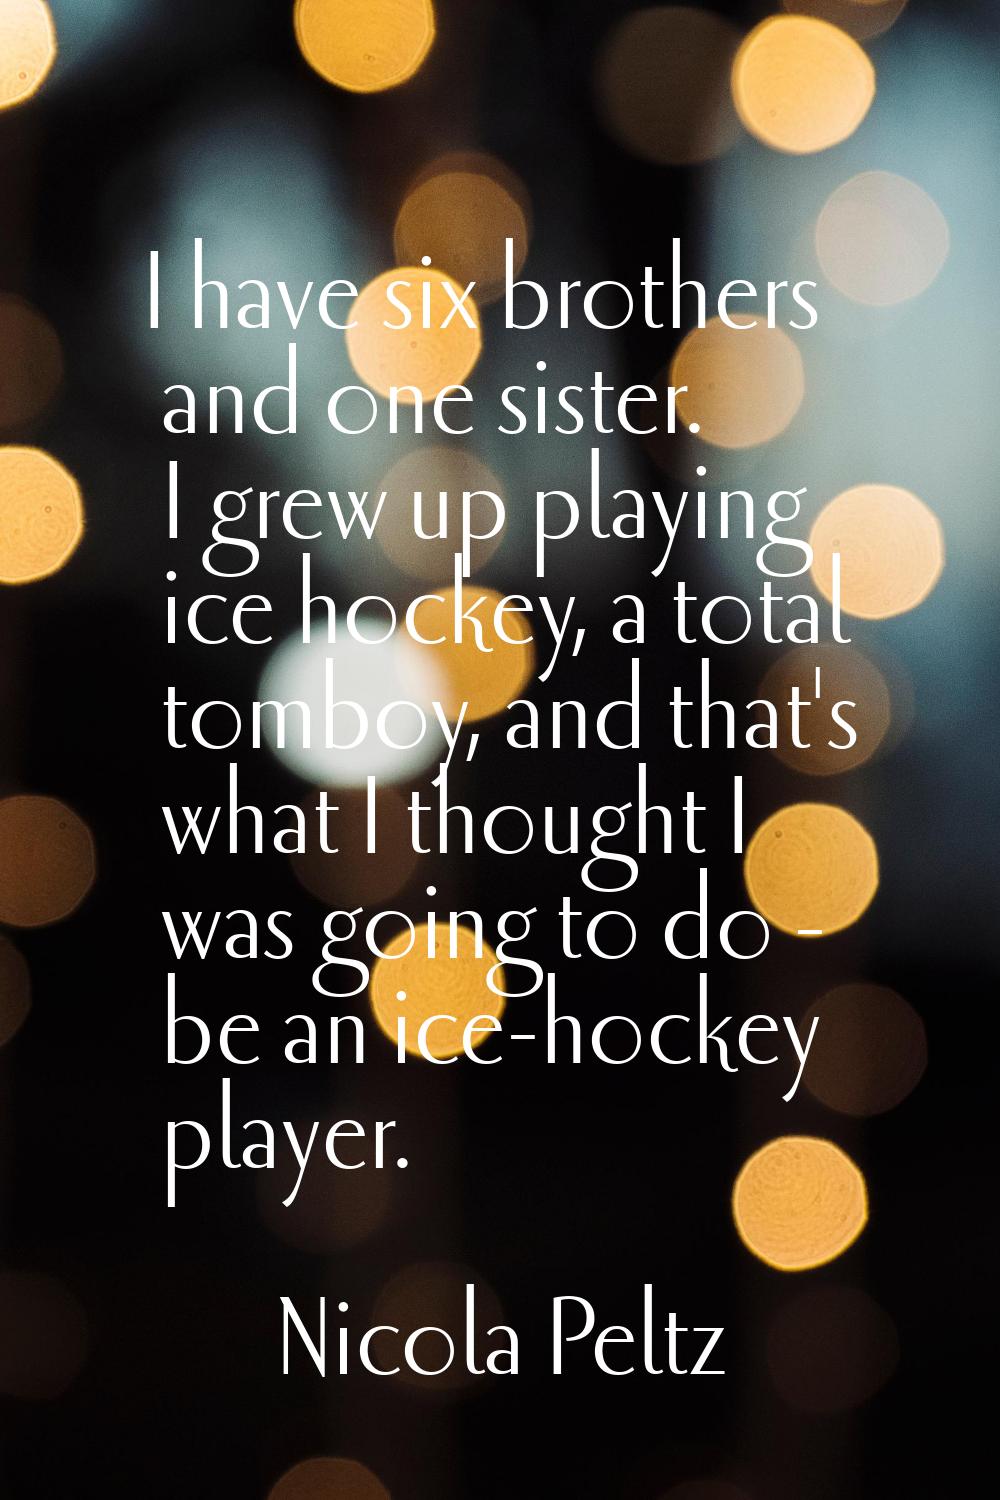 I have six brothers and one sister. I grew up playing ice hockey, a total tomboy, and that's what I